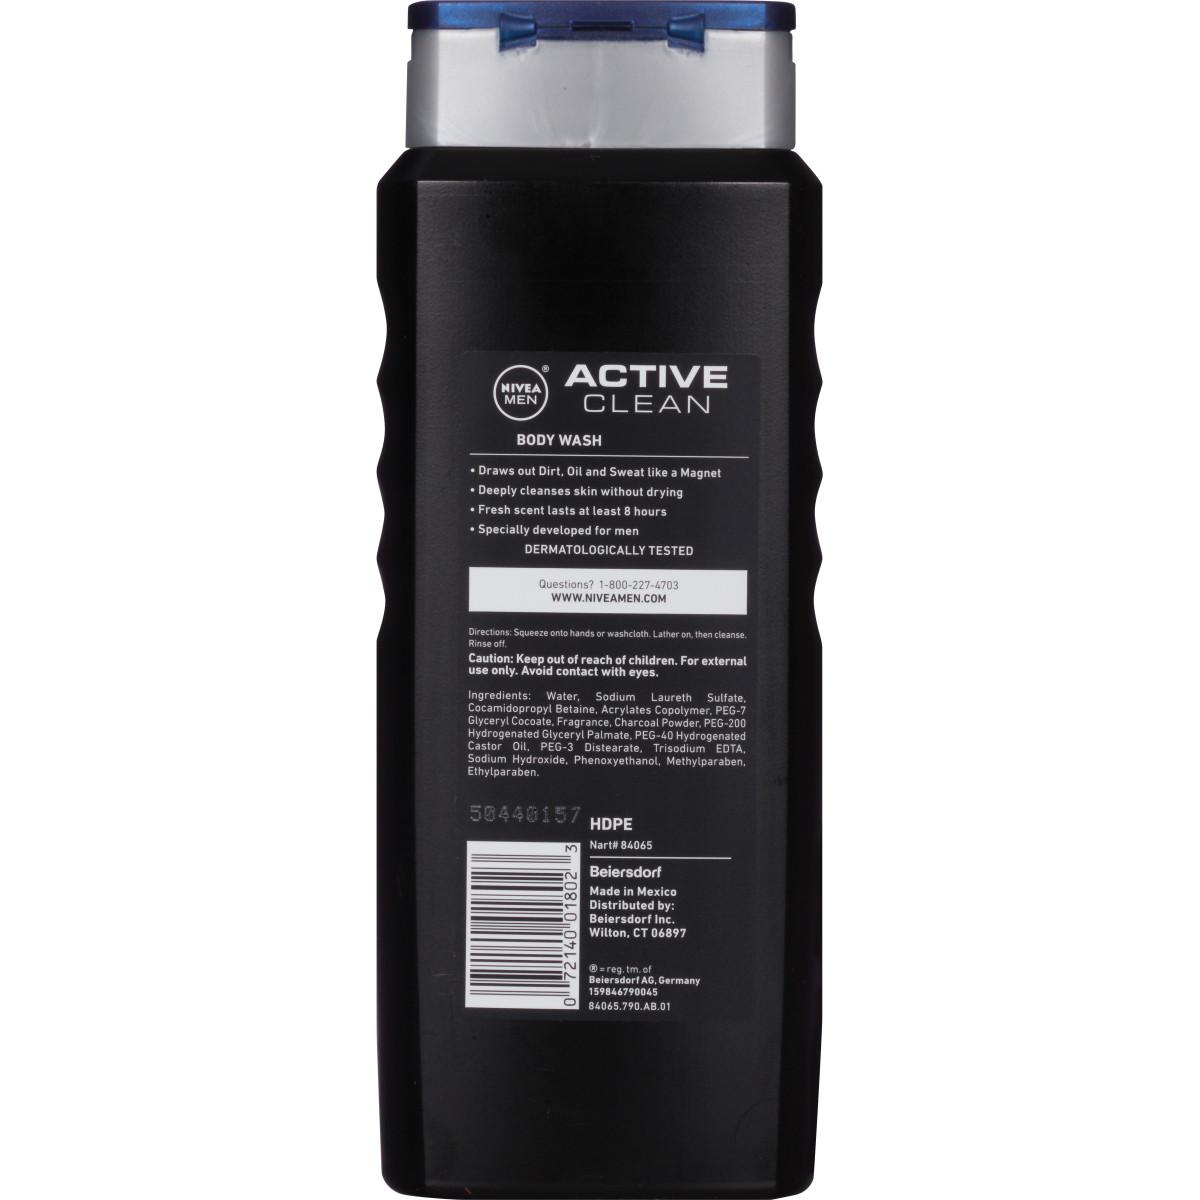 NIVEA Men Active Clean Body Wash with Natural Charcoal; image 2 of 3